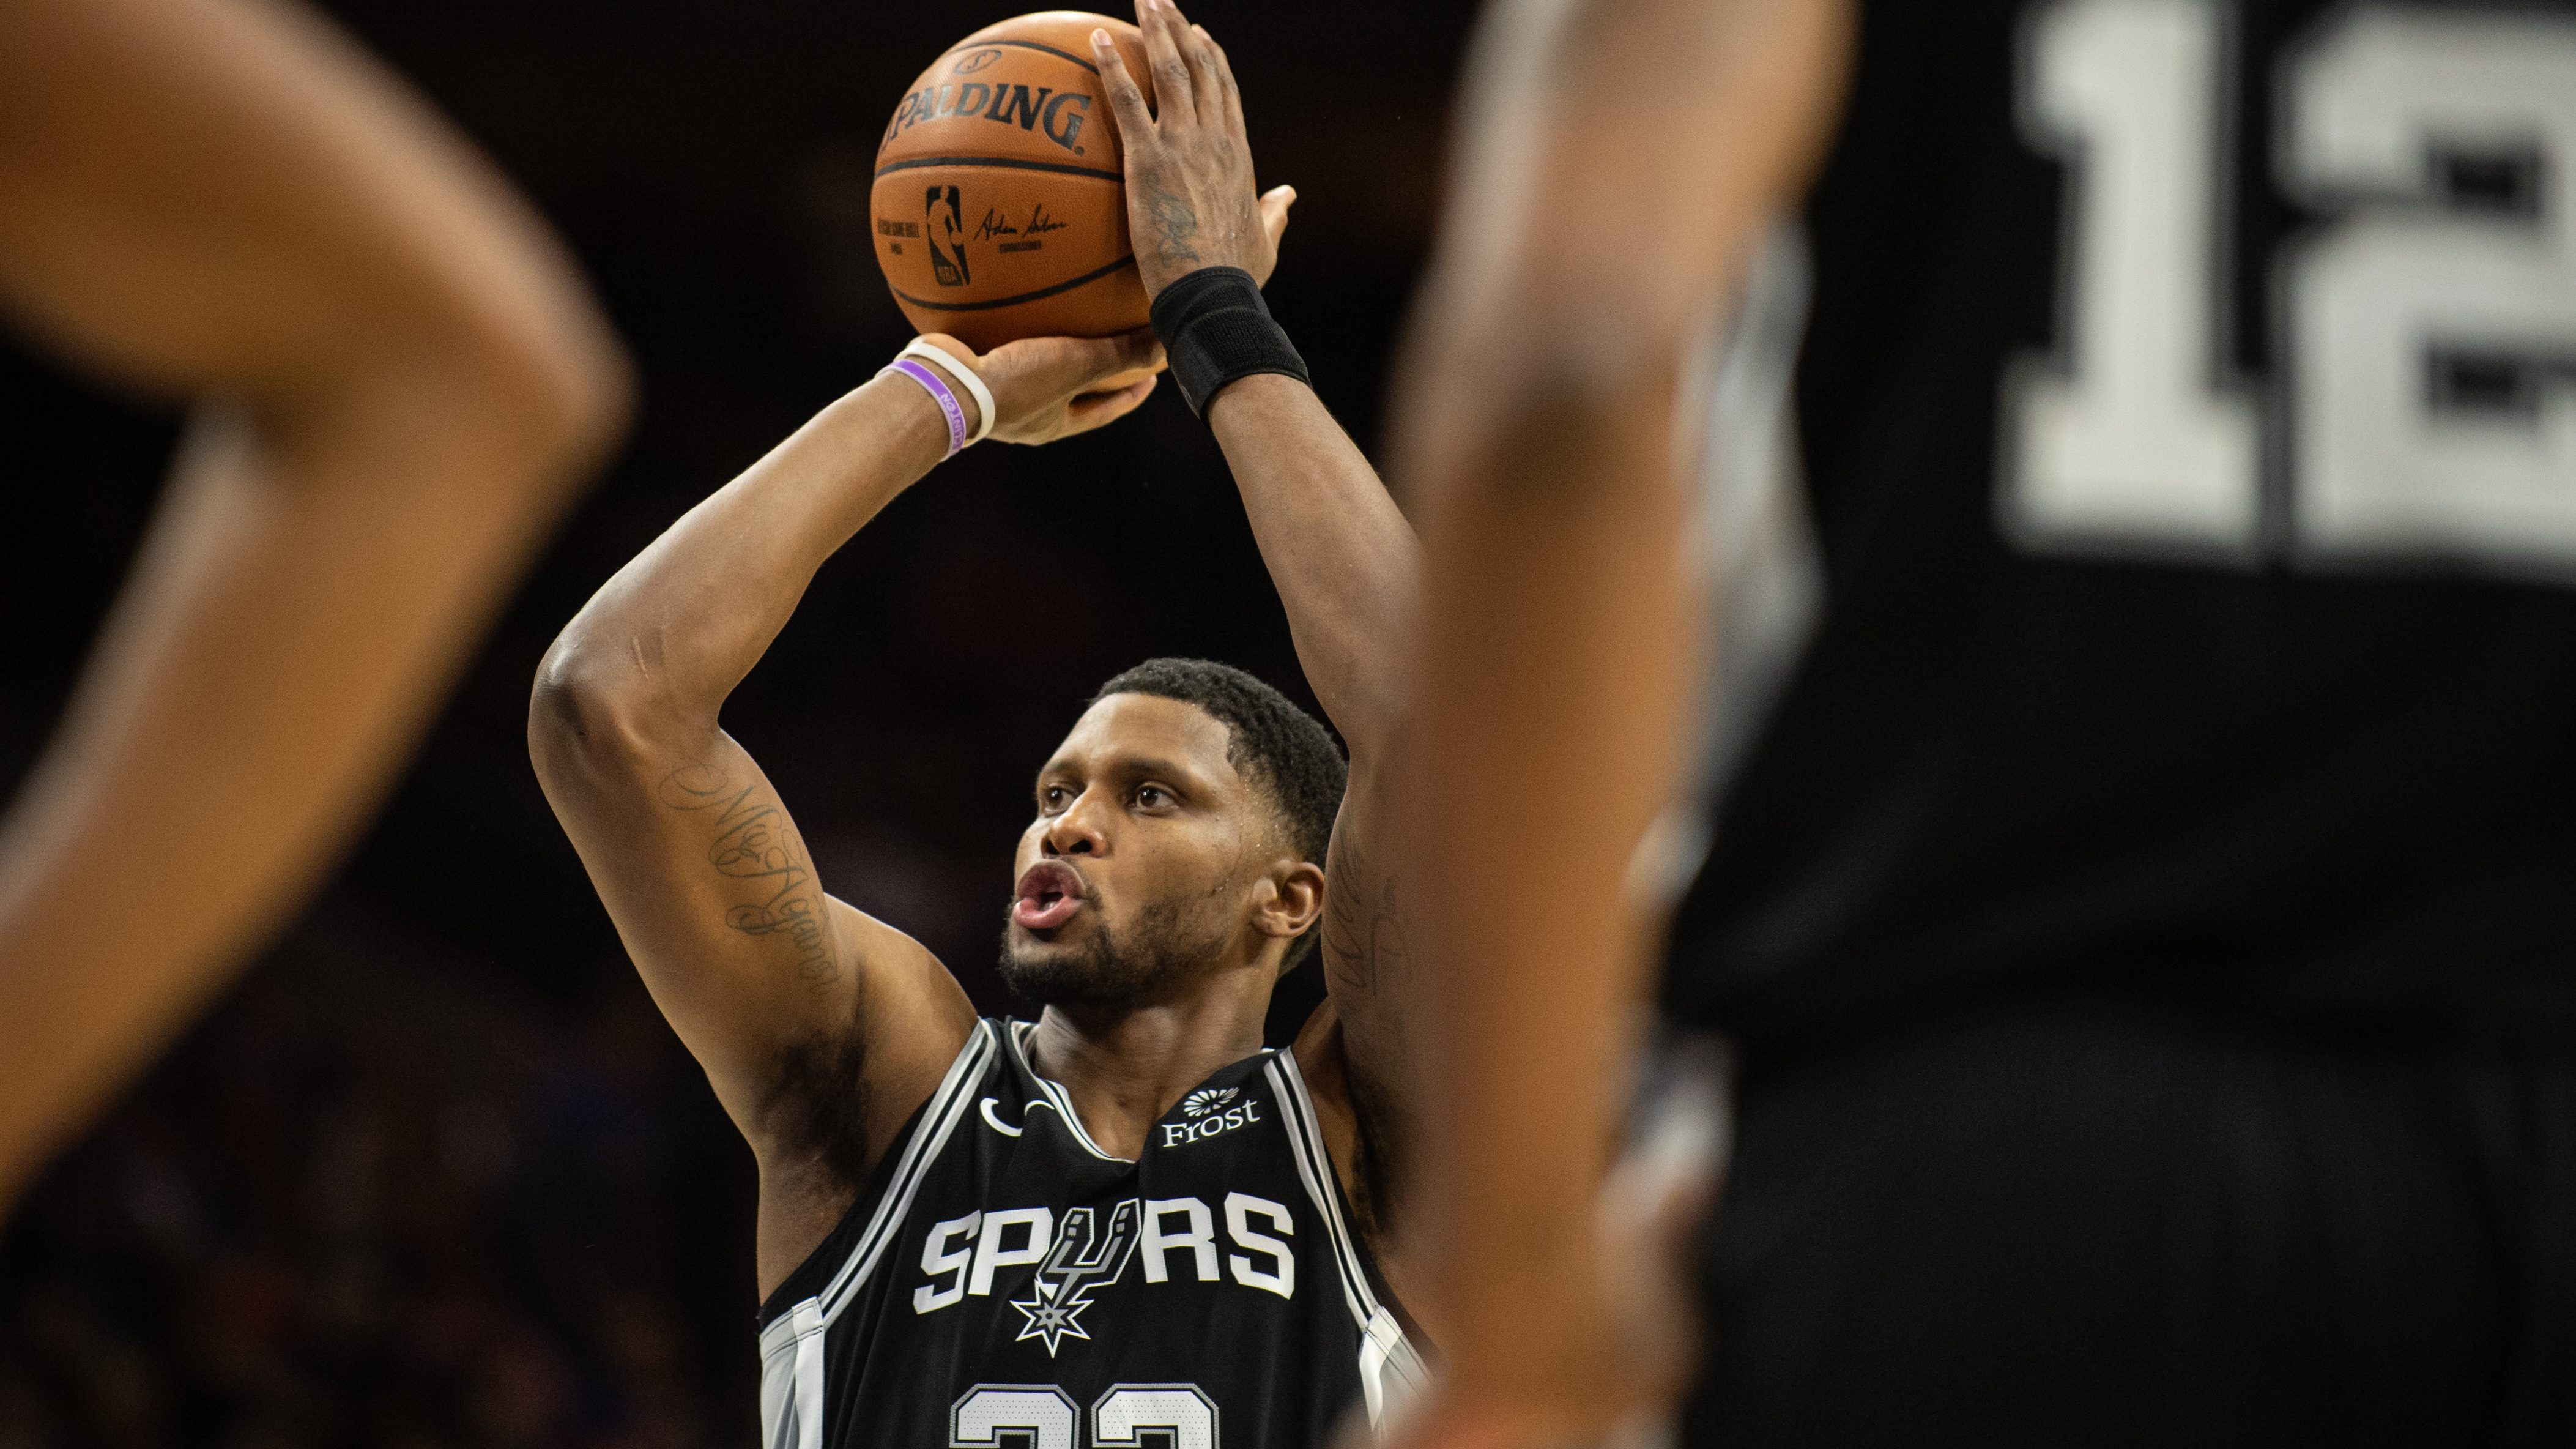 Rudy Gay will start for Spurs in Game 2 vs. Warriors